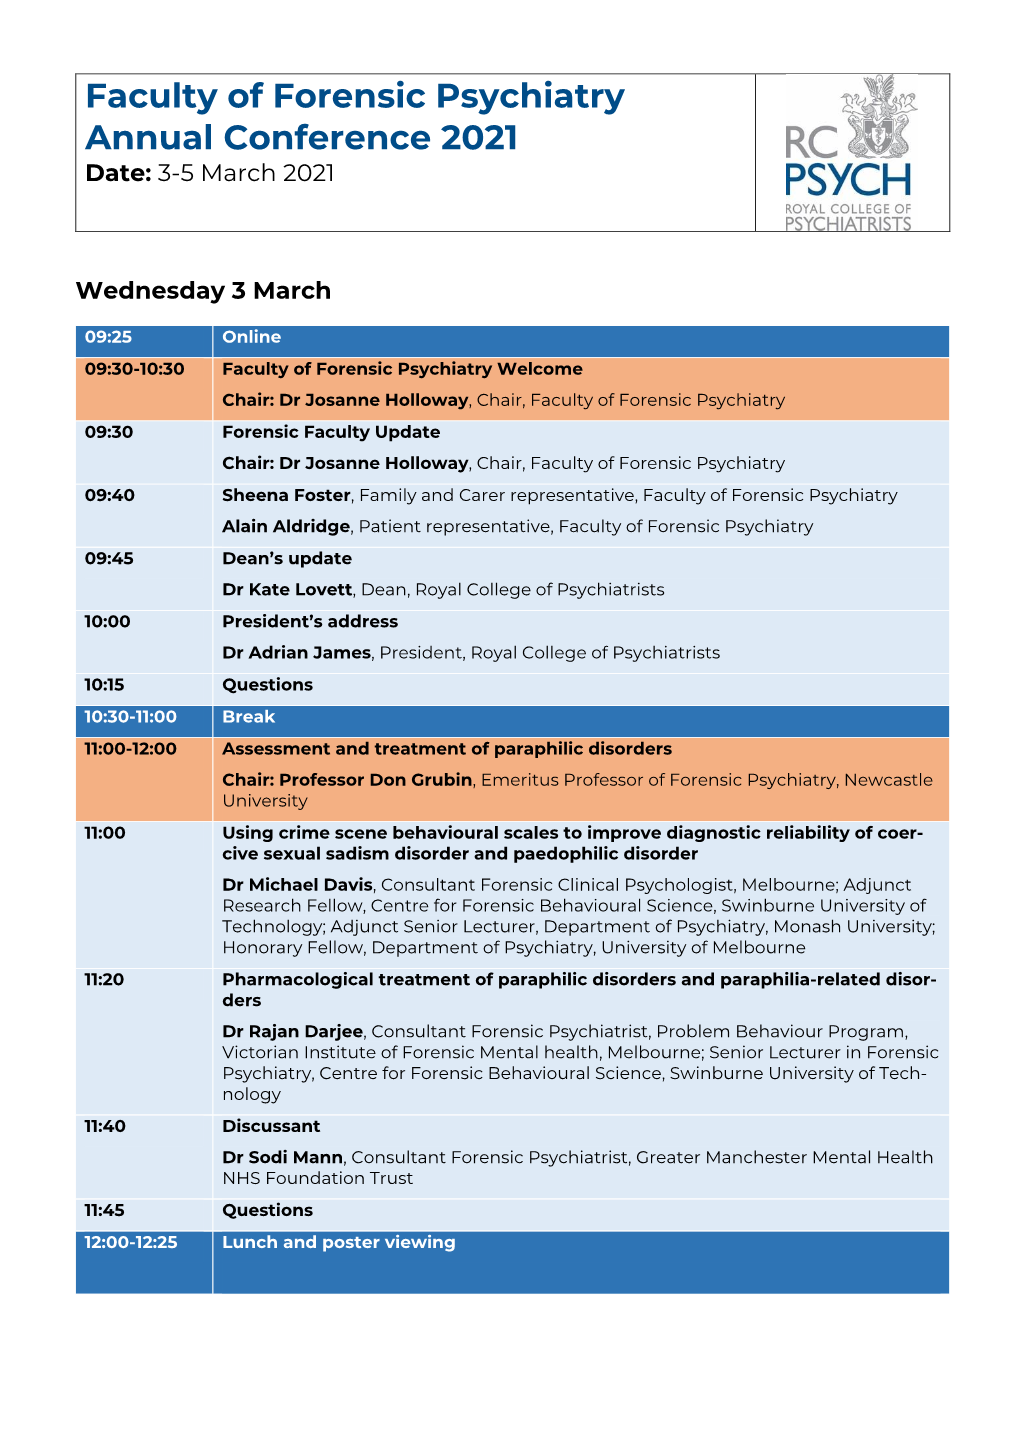 Faculty of Forensic Psychiatry Annual Conference 2021 Date: 3-5 March 2021